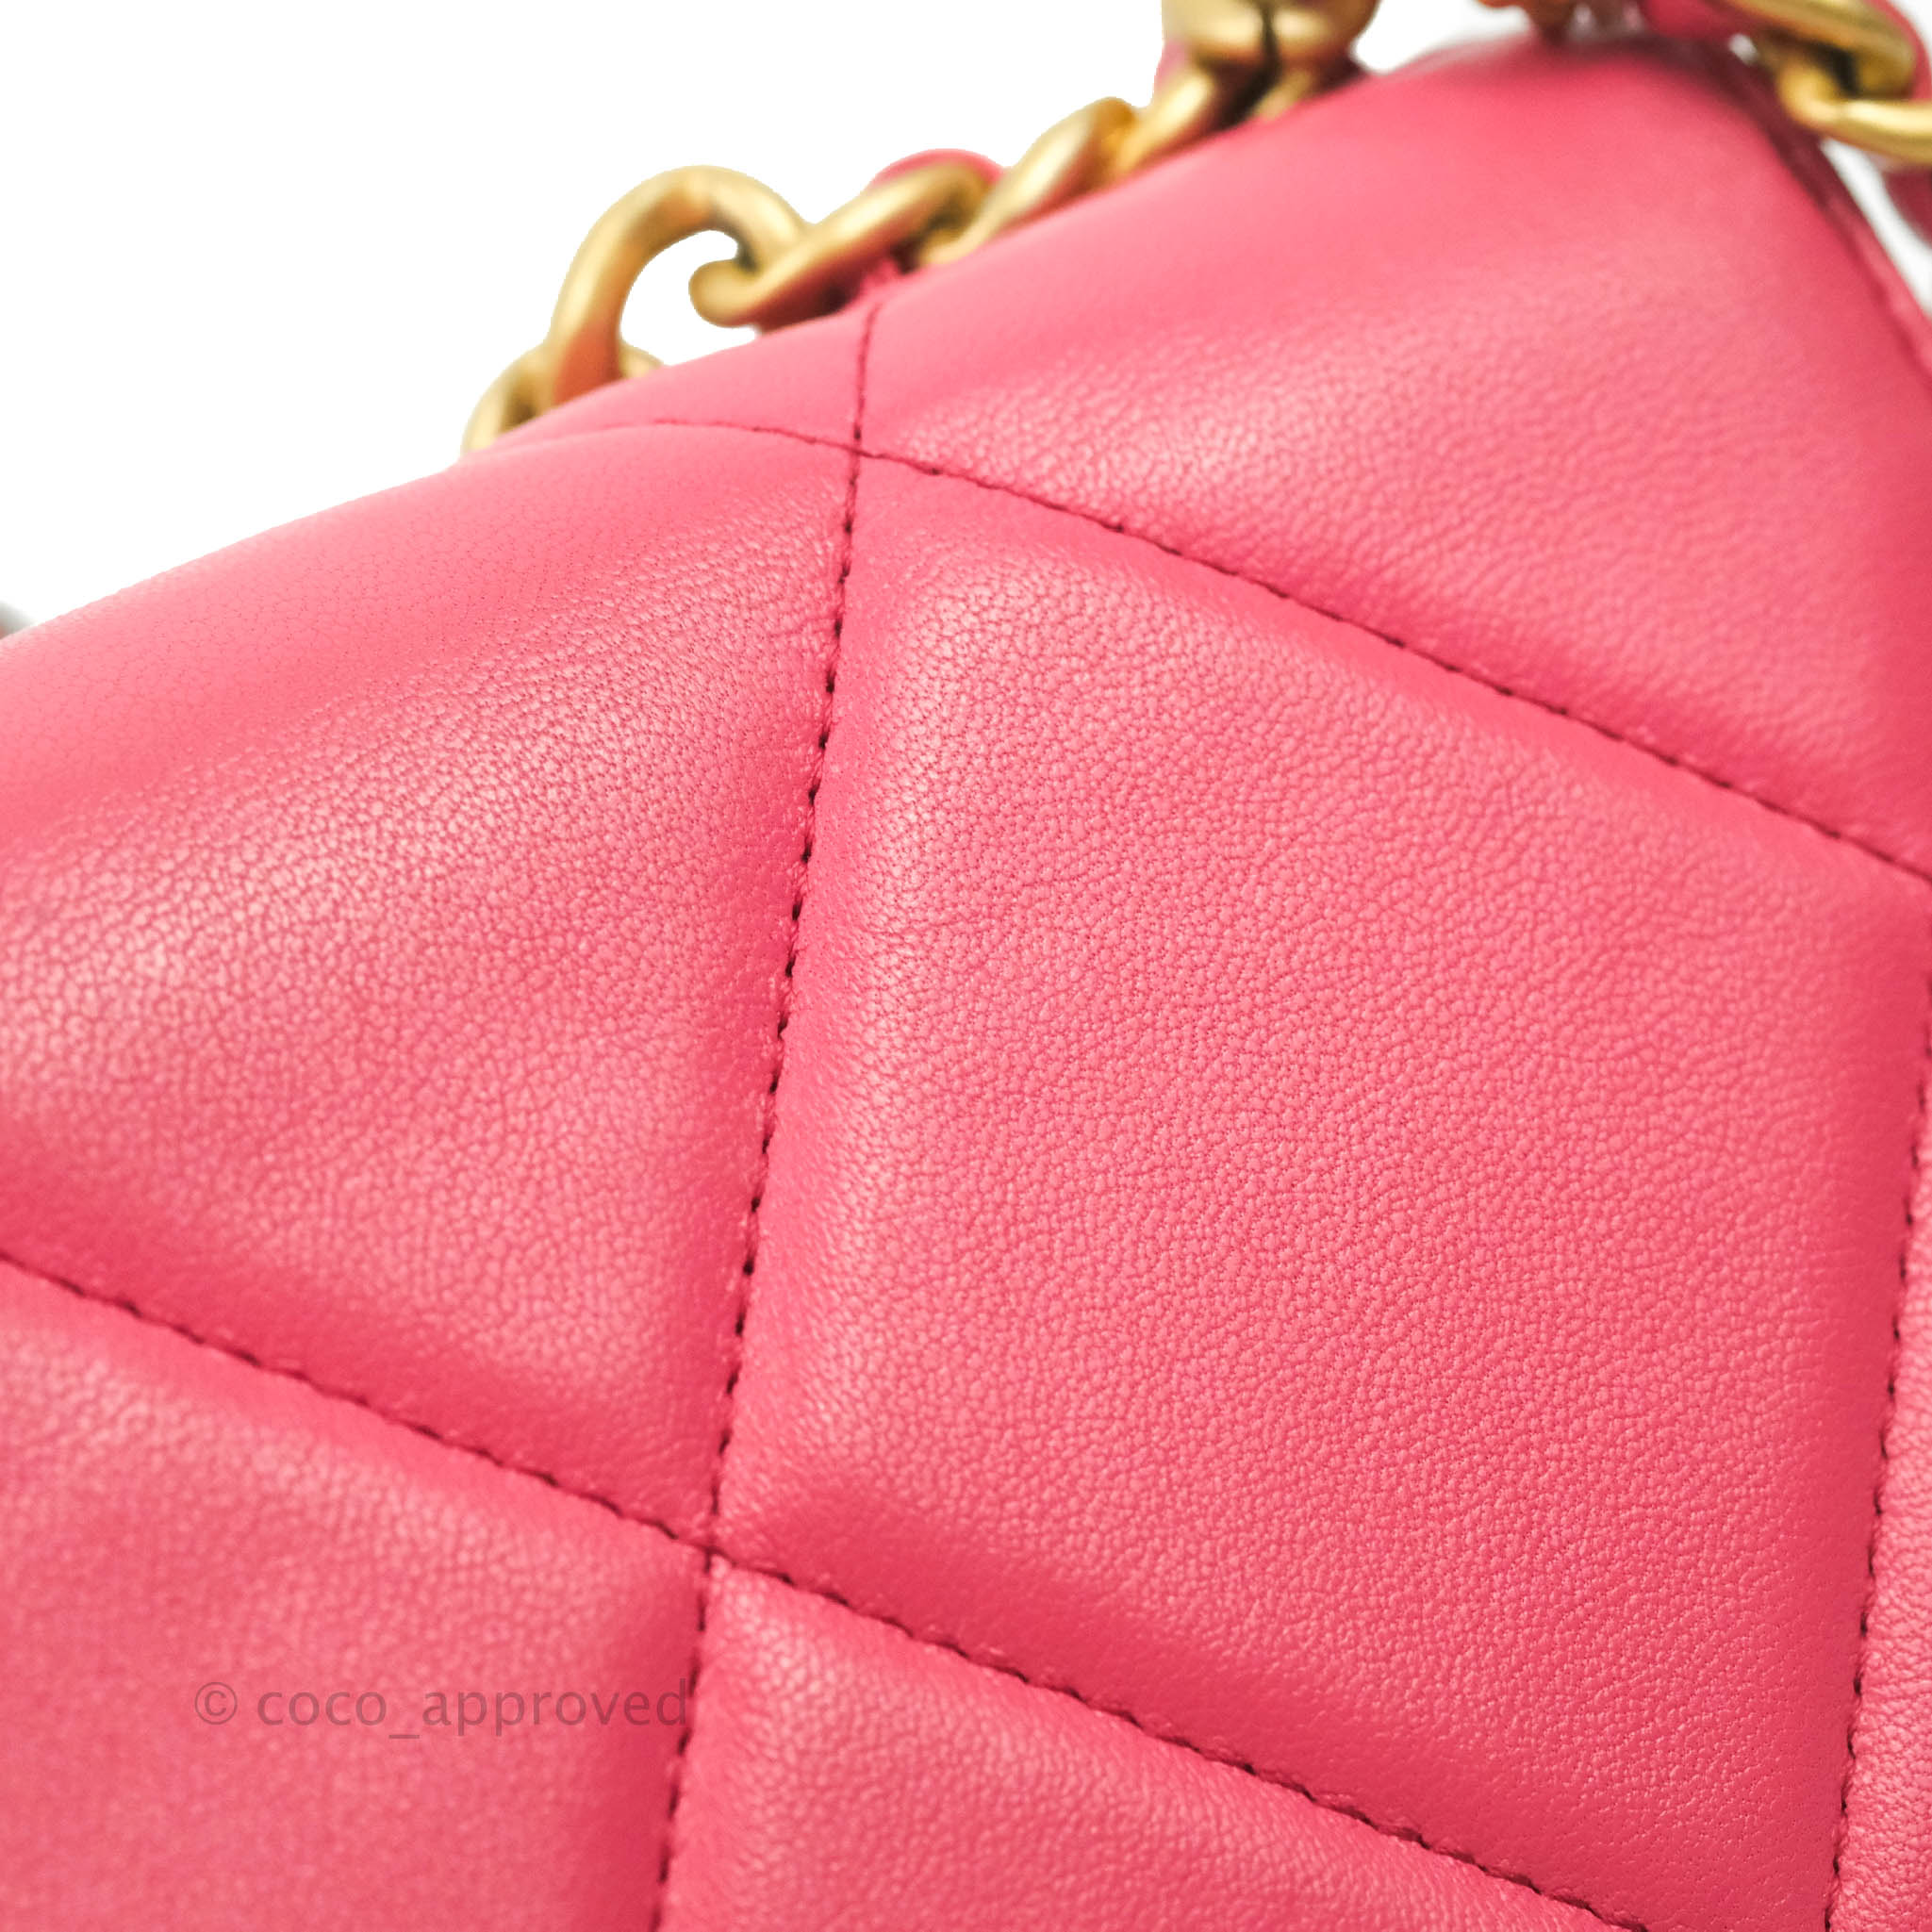 Chanel 19 leather wallet Chanel Pink in Leather - 21014909